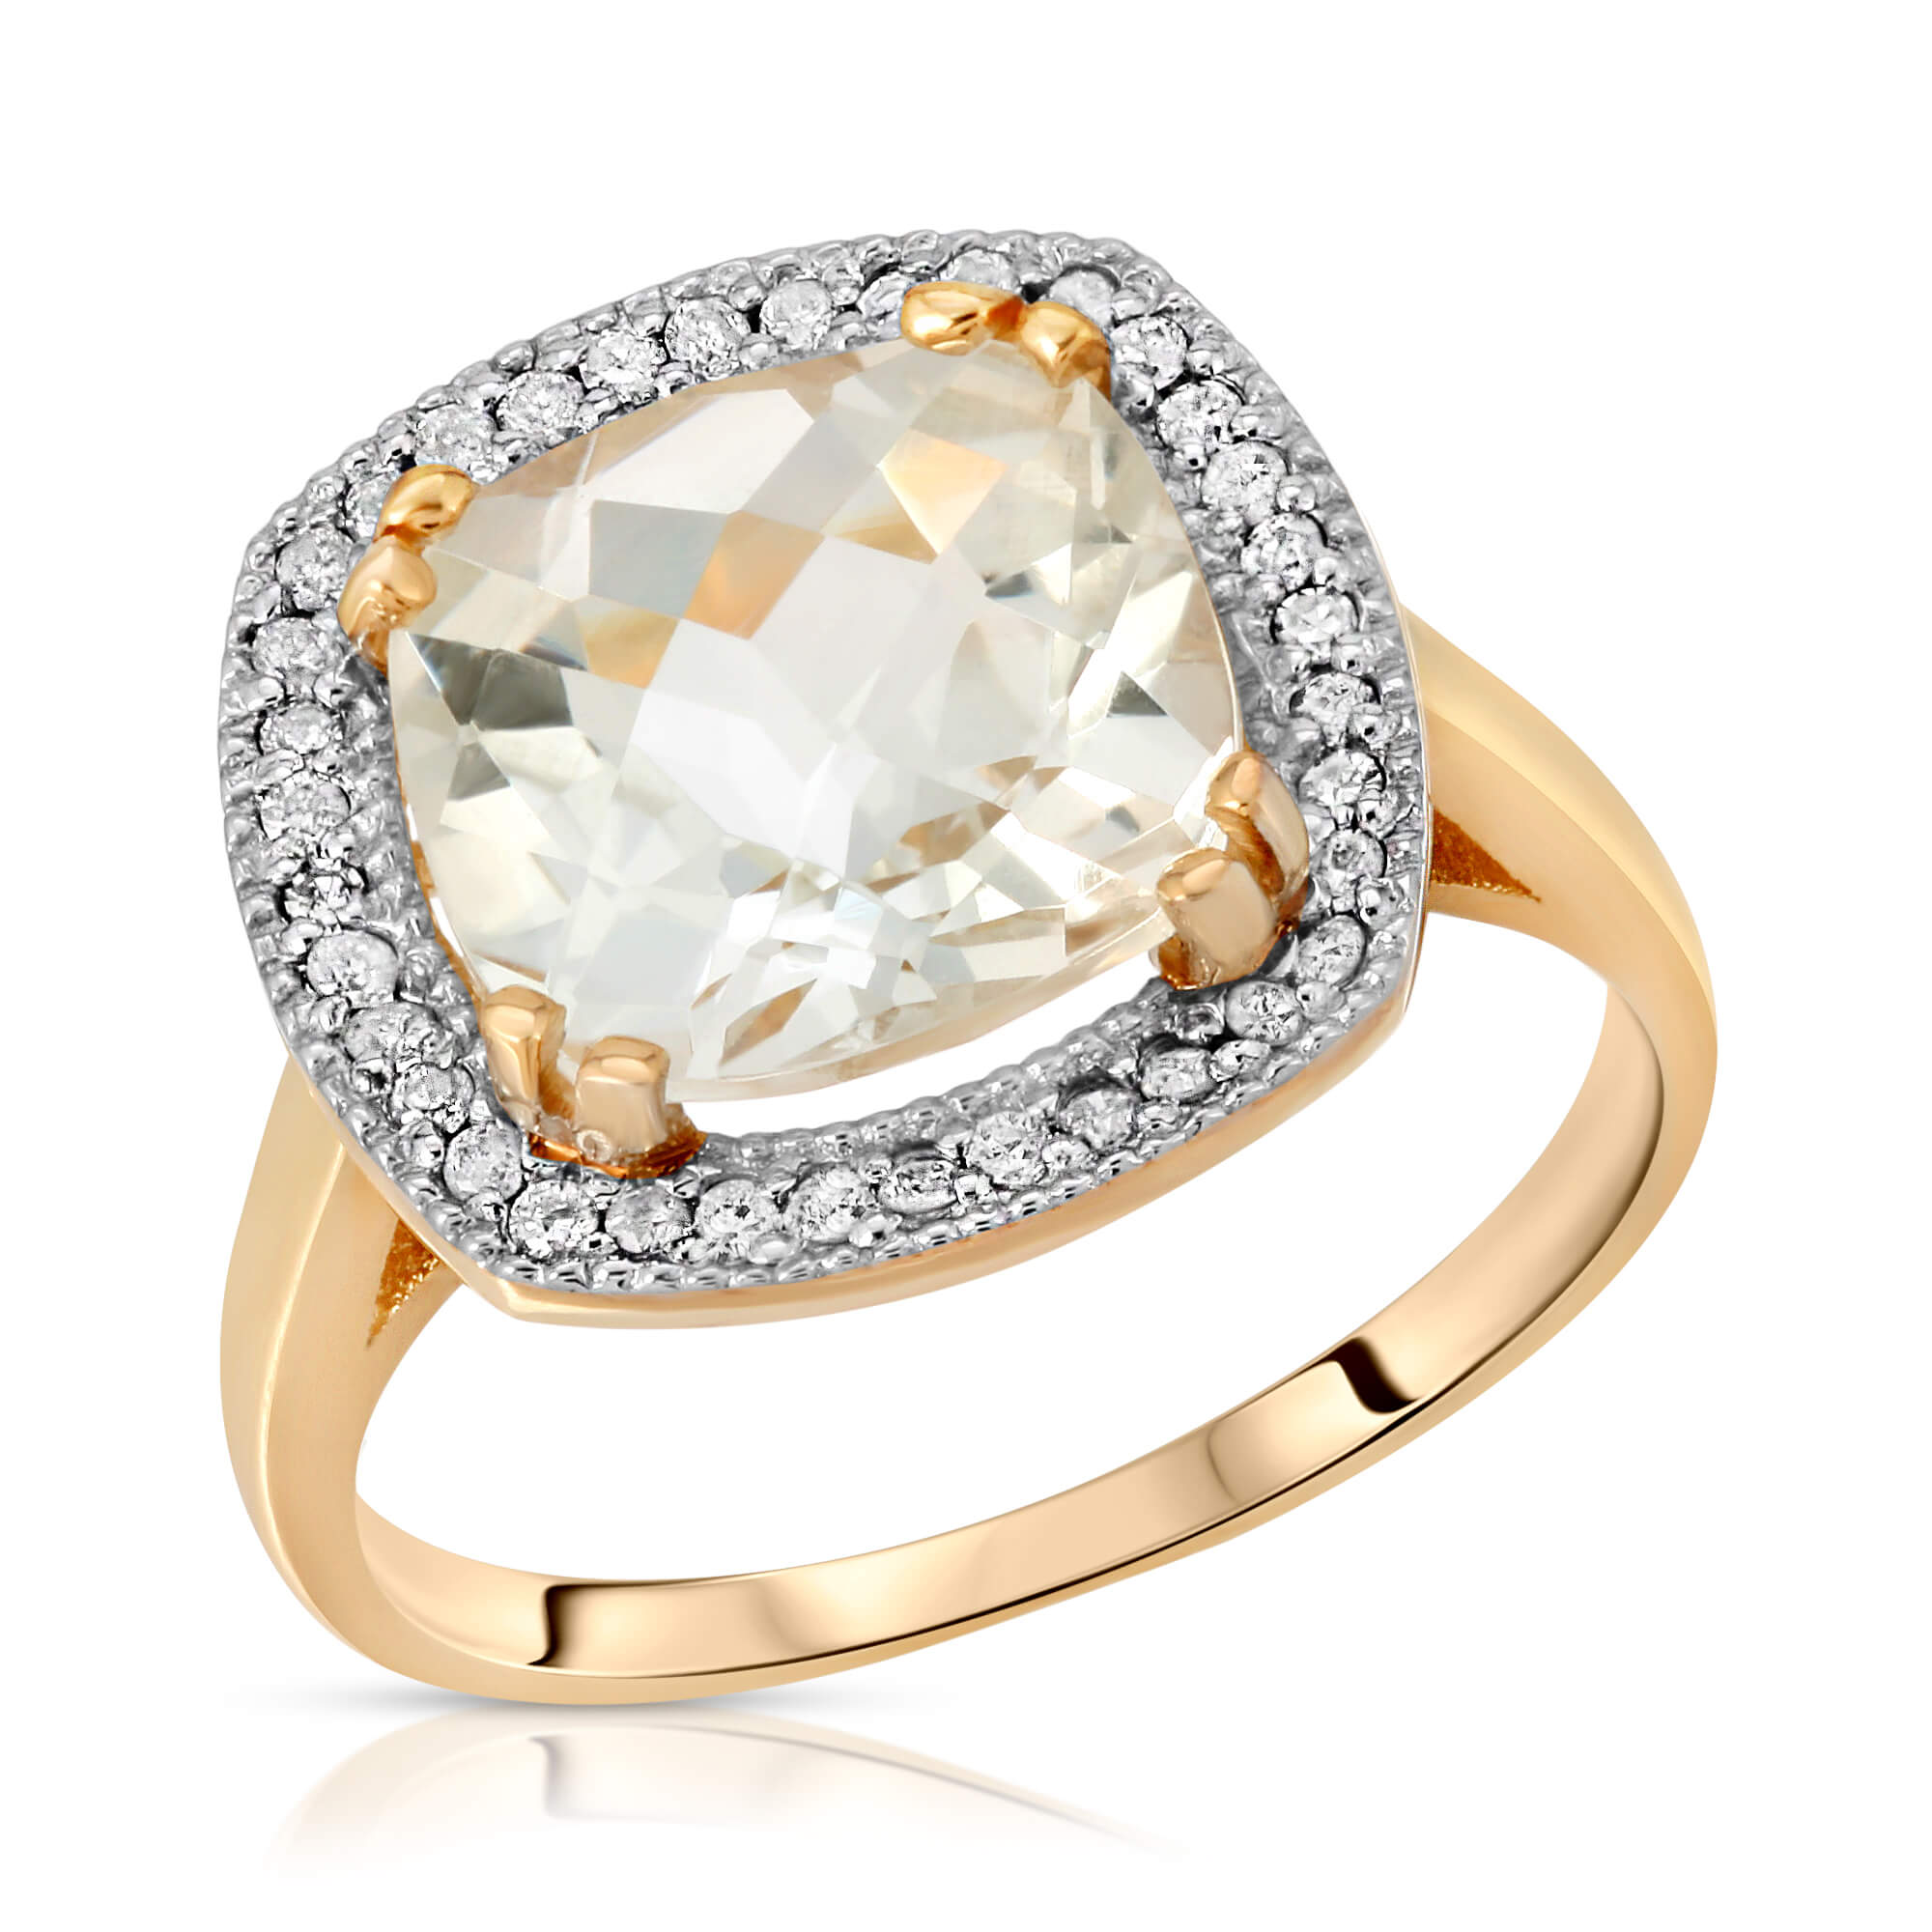 Cushion Cut White Topaz Ring 5.2 ctw in 9ct Gold